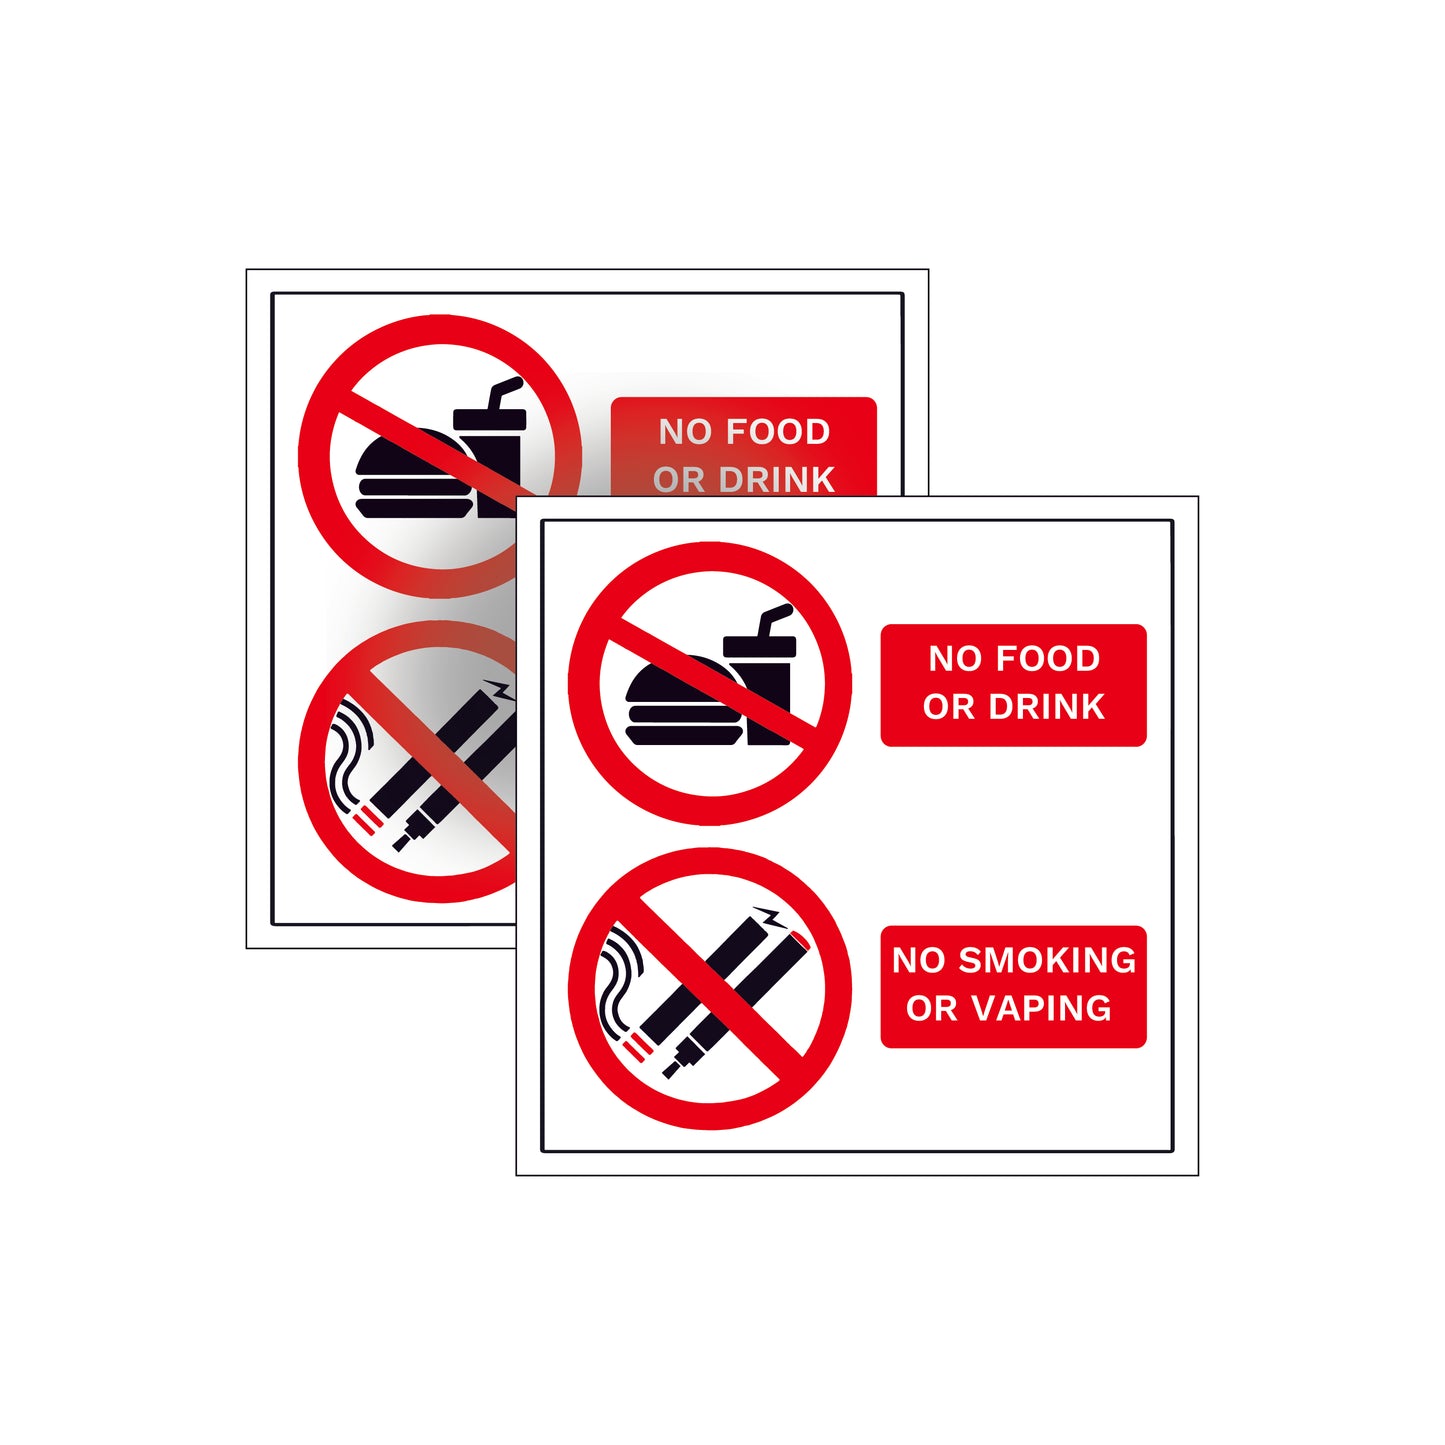 2 pack of No Smoking, vaping, food or drinks, vehicle warning stickers sign for taxi or cabs